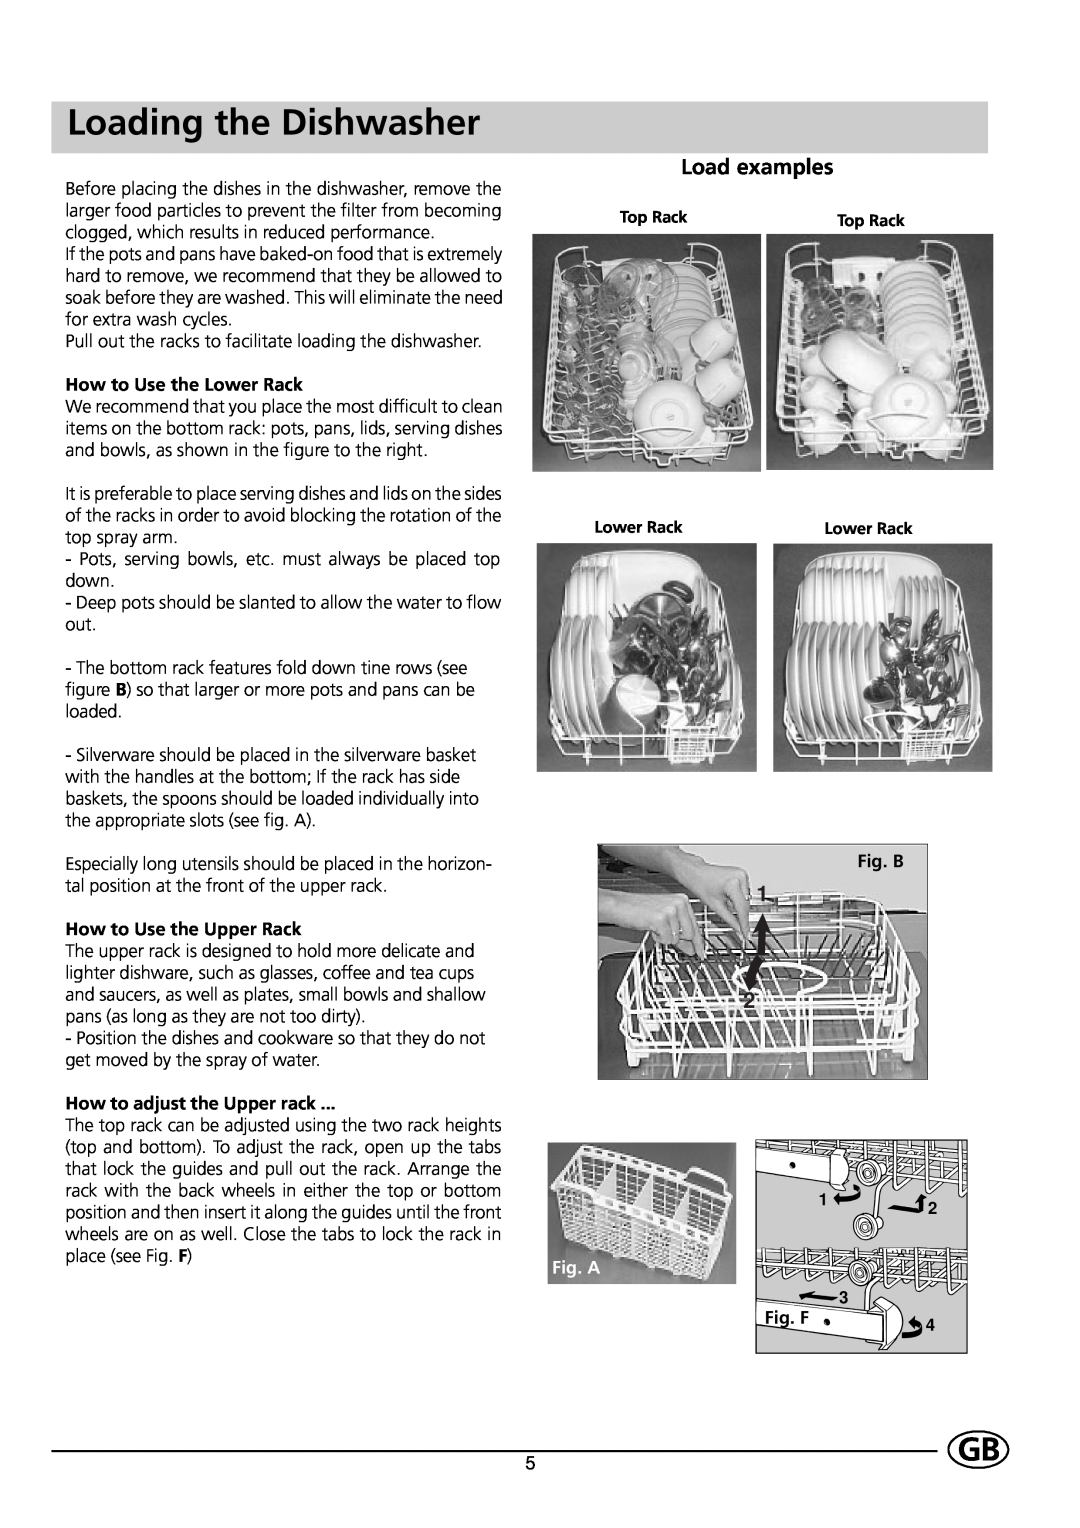 Indesit DE 43 Loading the Dishwasher, Load examples, How to Use the Lower Rack, How to Use the Upper Rack, Fig. B, Fig. A 